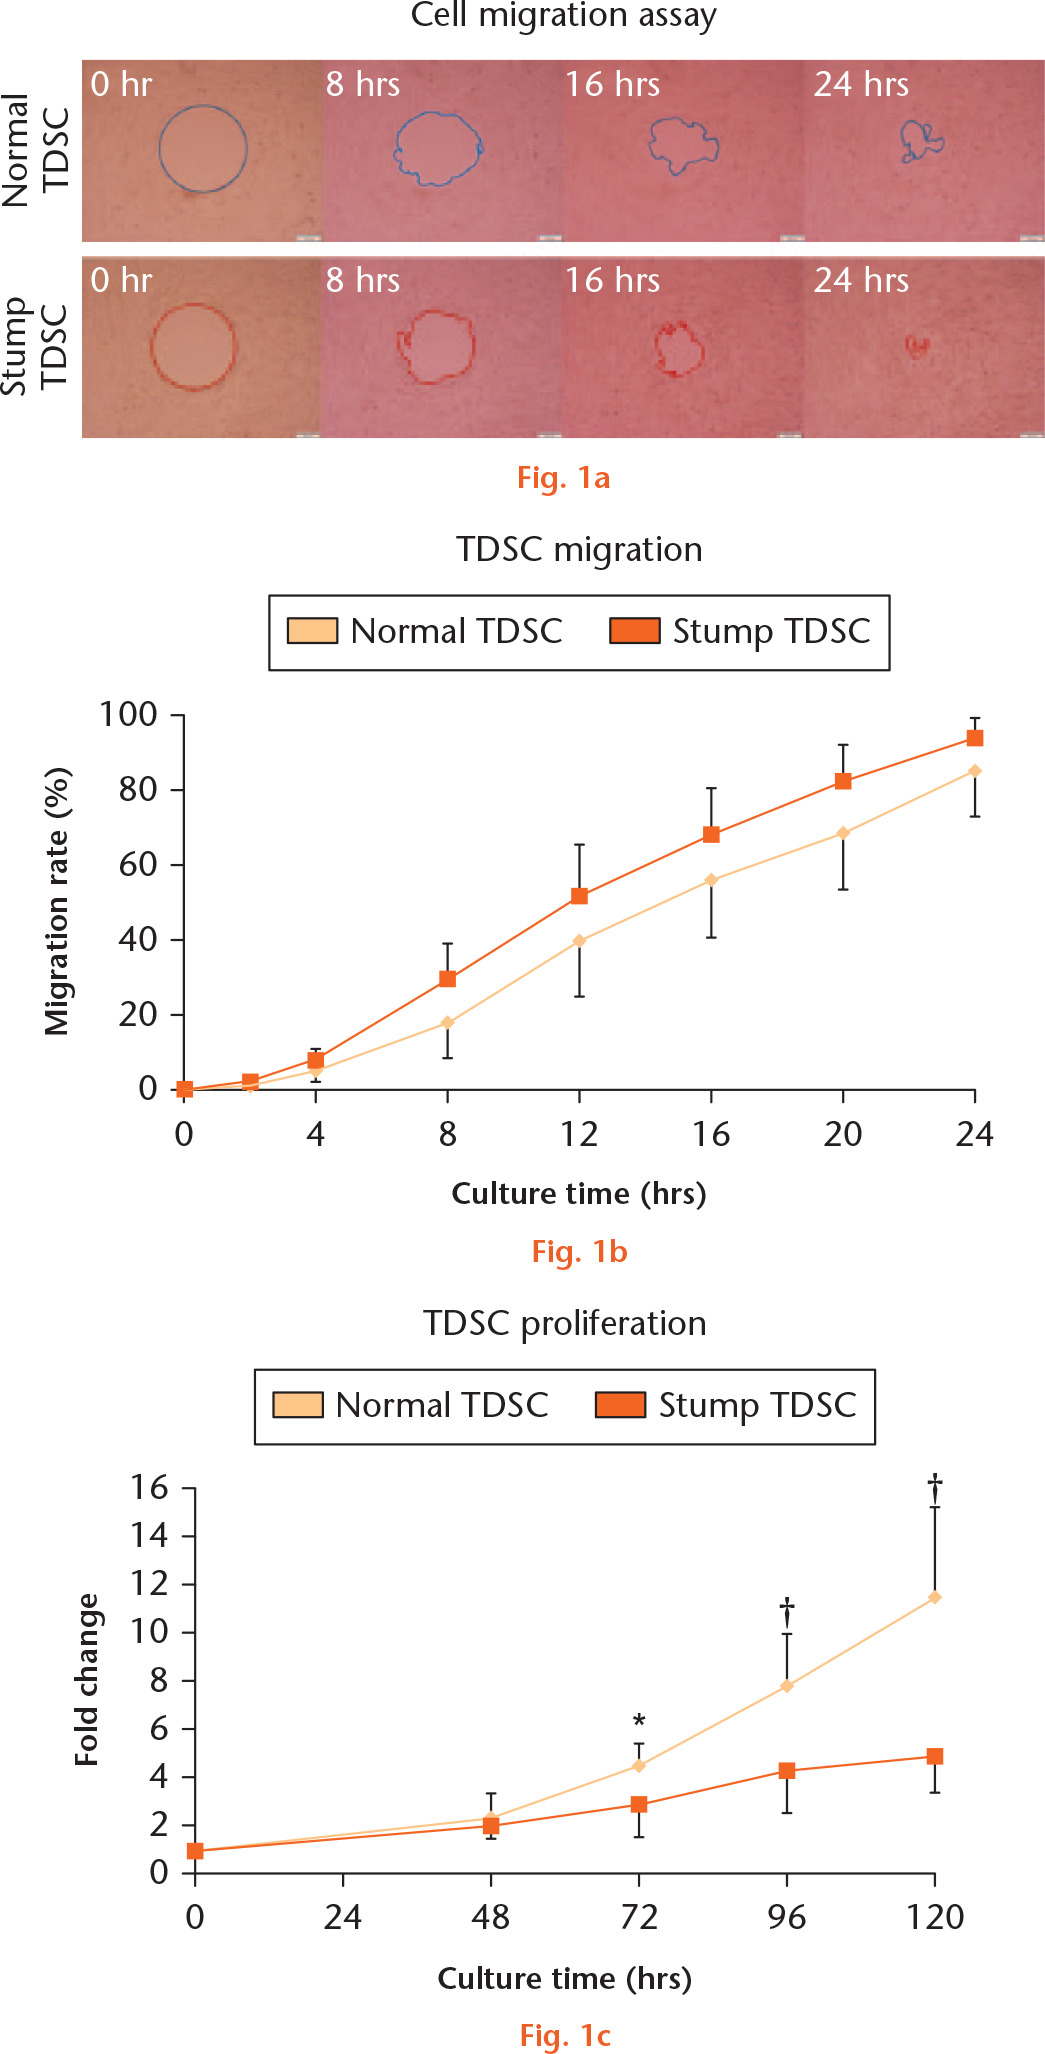 Fig. 1 
            Cell migration and proliferation of stump and normal tendon-derived stem cells (TDSCs). a) The migration rate was calculated as follows: (initial wound area - residual wound area)/initial wound area (%). Scale bar = 200 μm. b) Chart showing that the migration rate of stump TDSCs had an upward trend compared with that of normal TDSCs, but without significant difference (n = 6). c) Chart showing that the stump TDSCs proliferated more slowly than normal TDSCs, with significant differentiation beginning from 72 hours (n = 9). The data are expressed as means (standard deviation). *p < 0.05; †p < 0.01 (unpaired Student’s t-test).
          